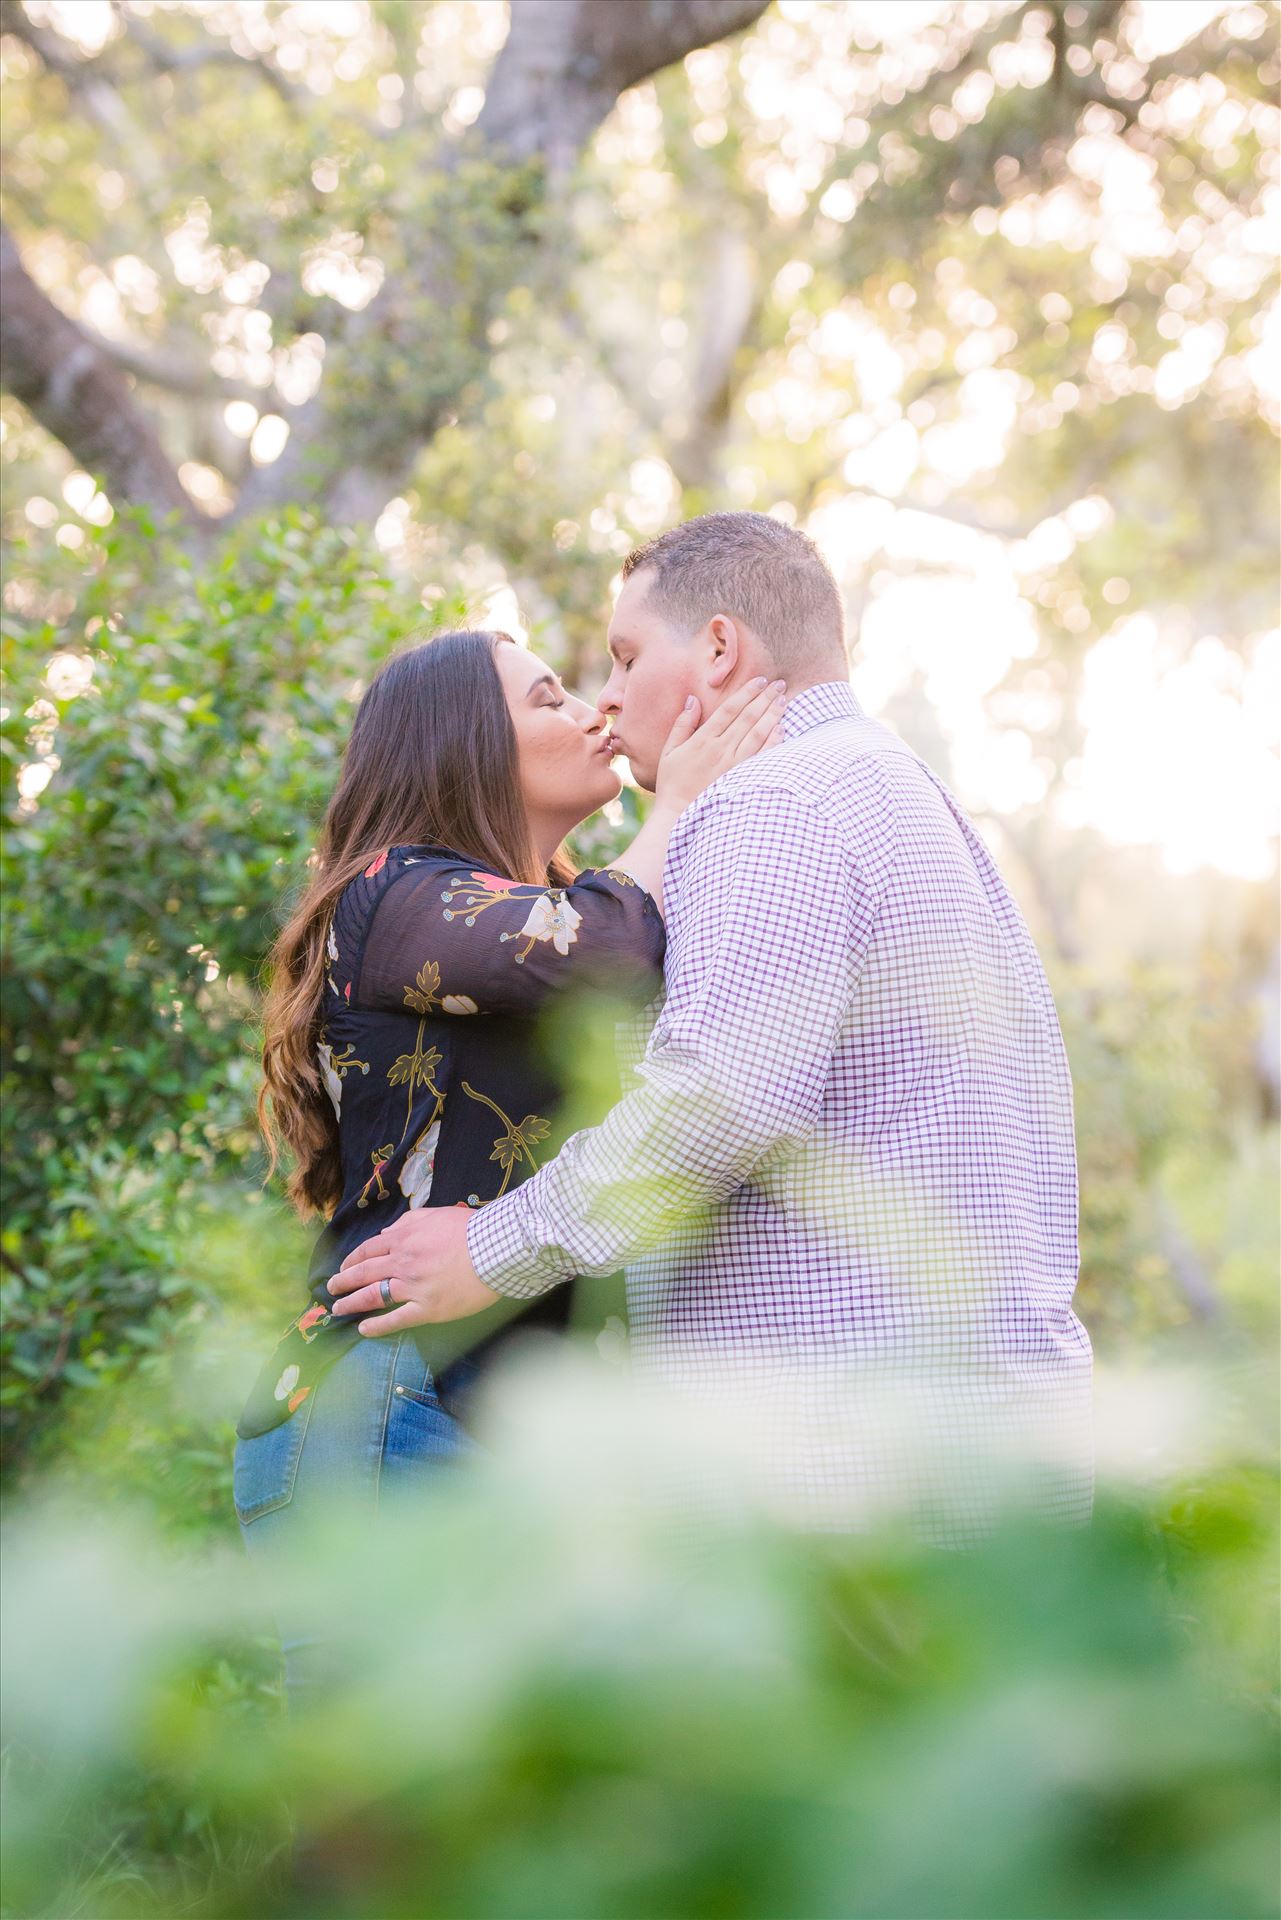 DSC_3616.JPG Los Osos Oaks Nature Reserve Engagement Photography Session by Mirror's Edge Photography with gorgeous light by Sarah Williams